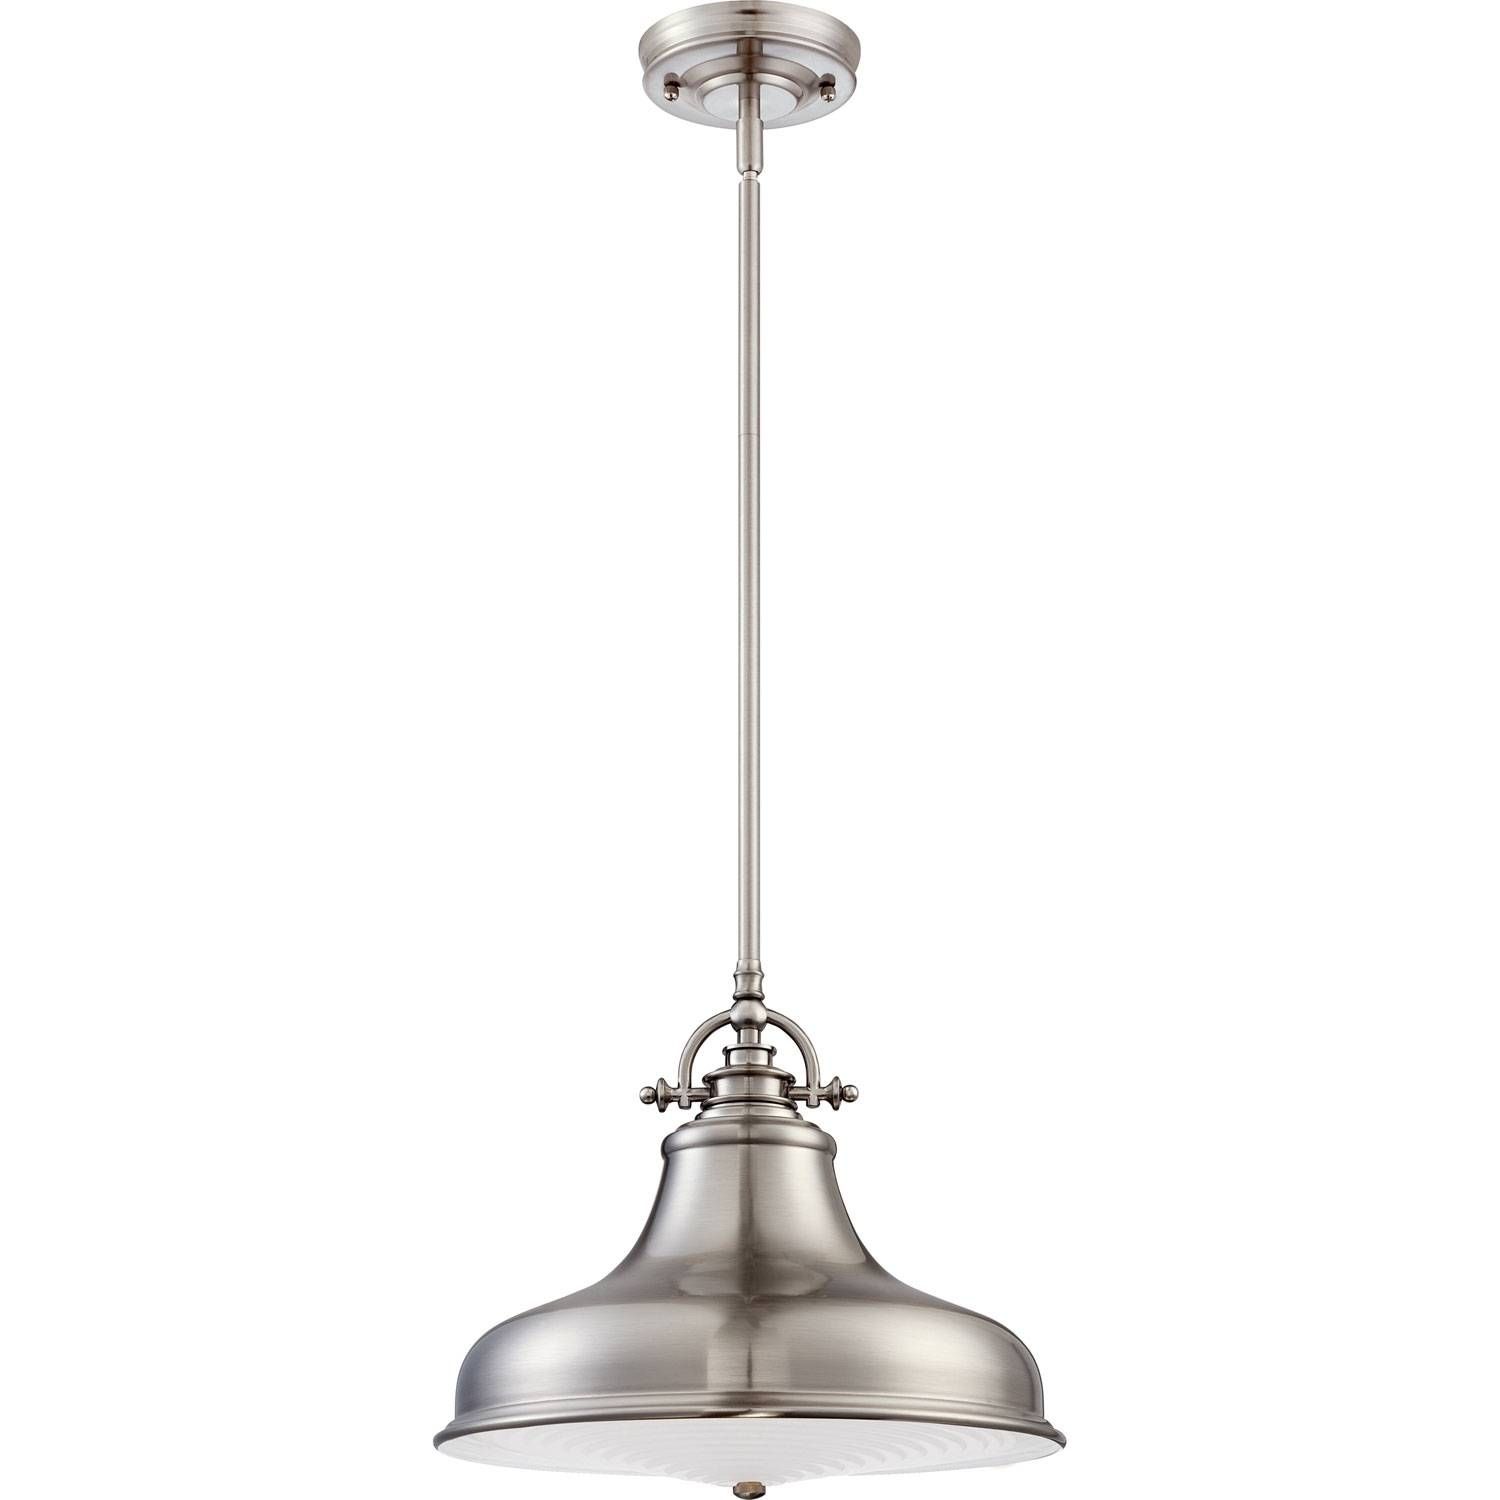 Quoizel Emery Brushed Nickel One Light Pendant On Sale Inside Satin Nickel Pendant Light Fixtures (View 4 of 14)